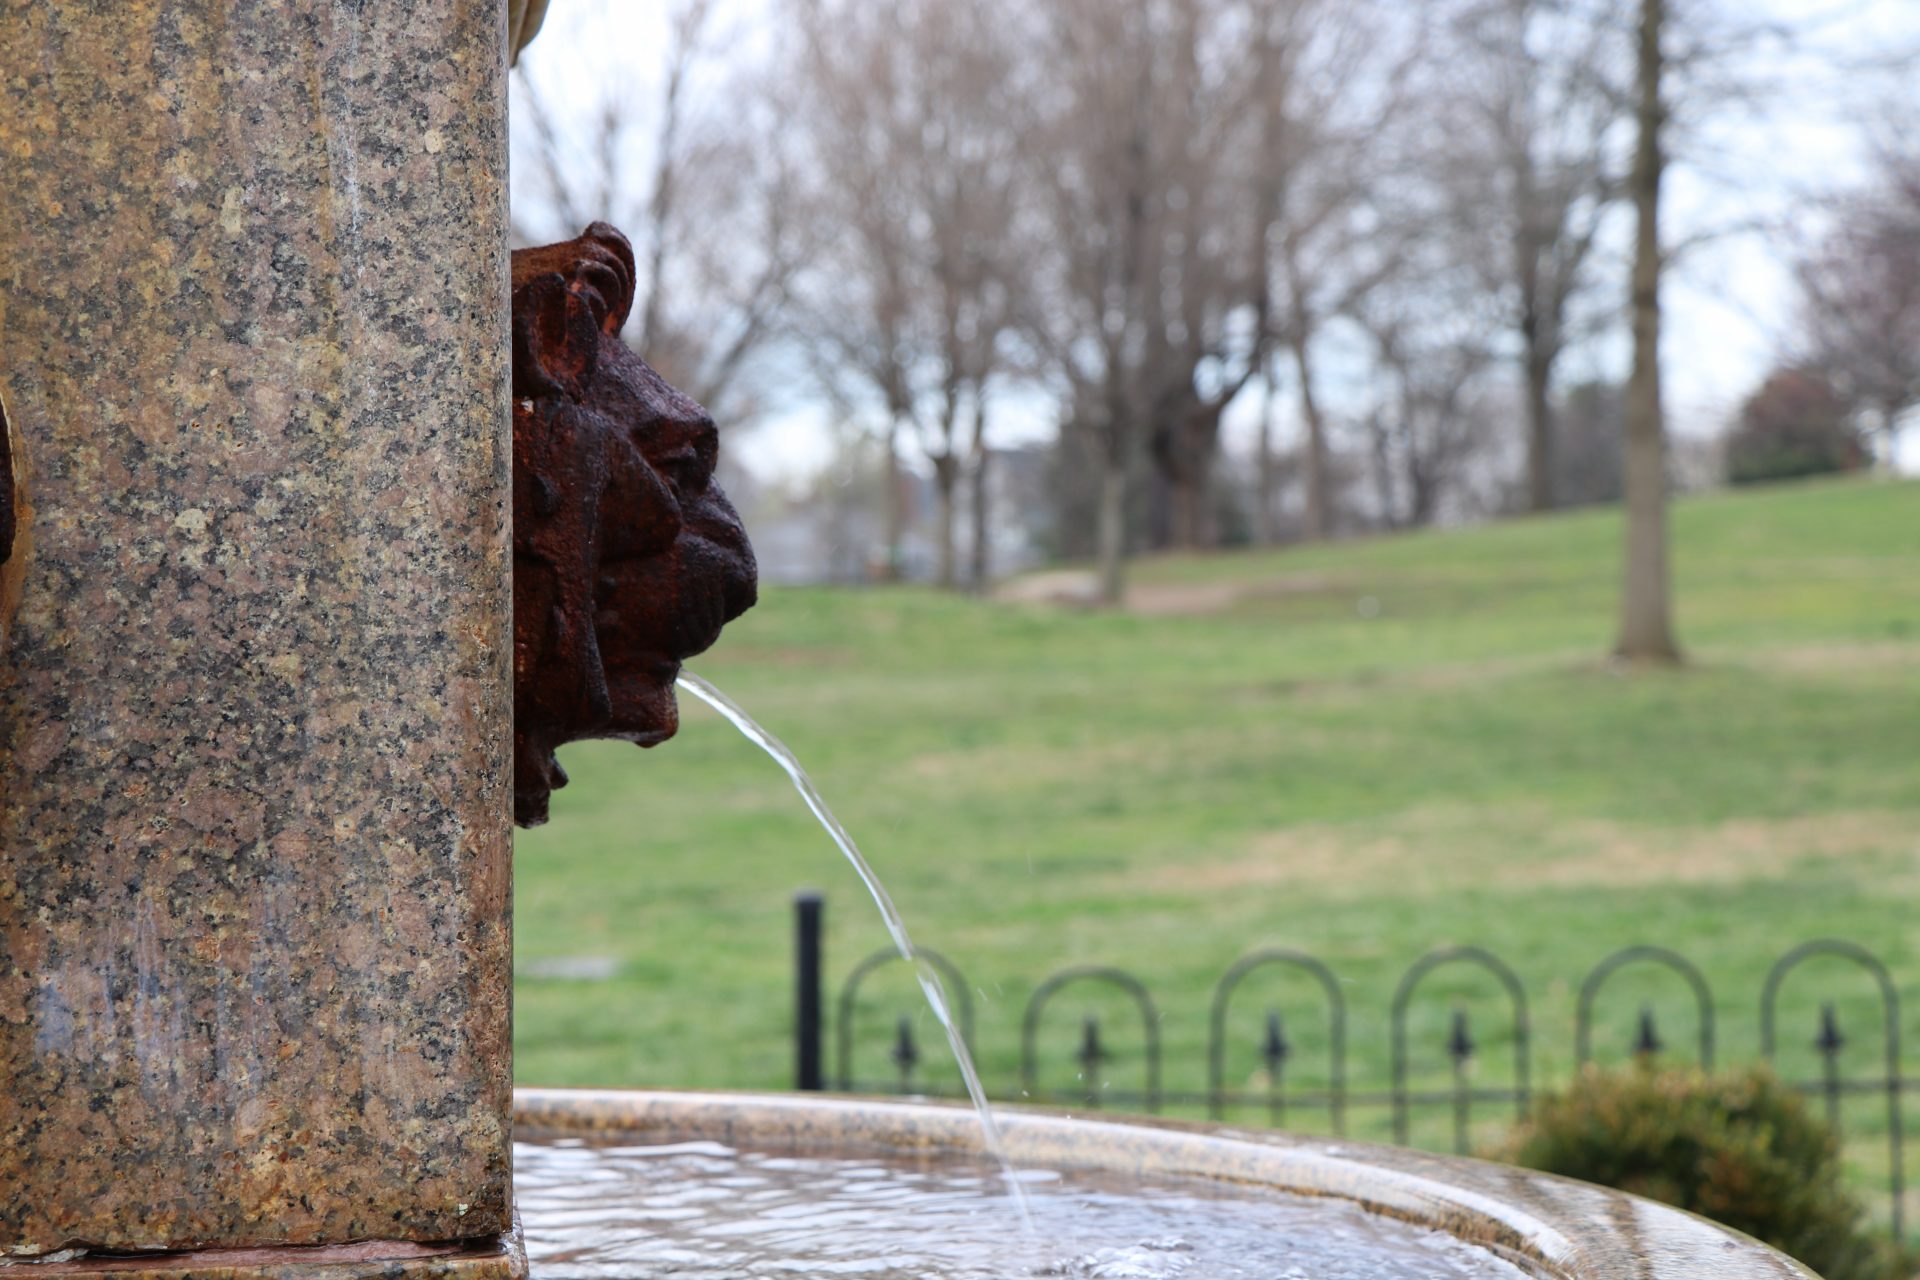 Up close shot of a fountain with water pouring from a lion's mouth